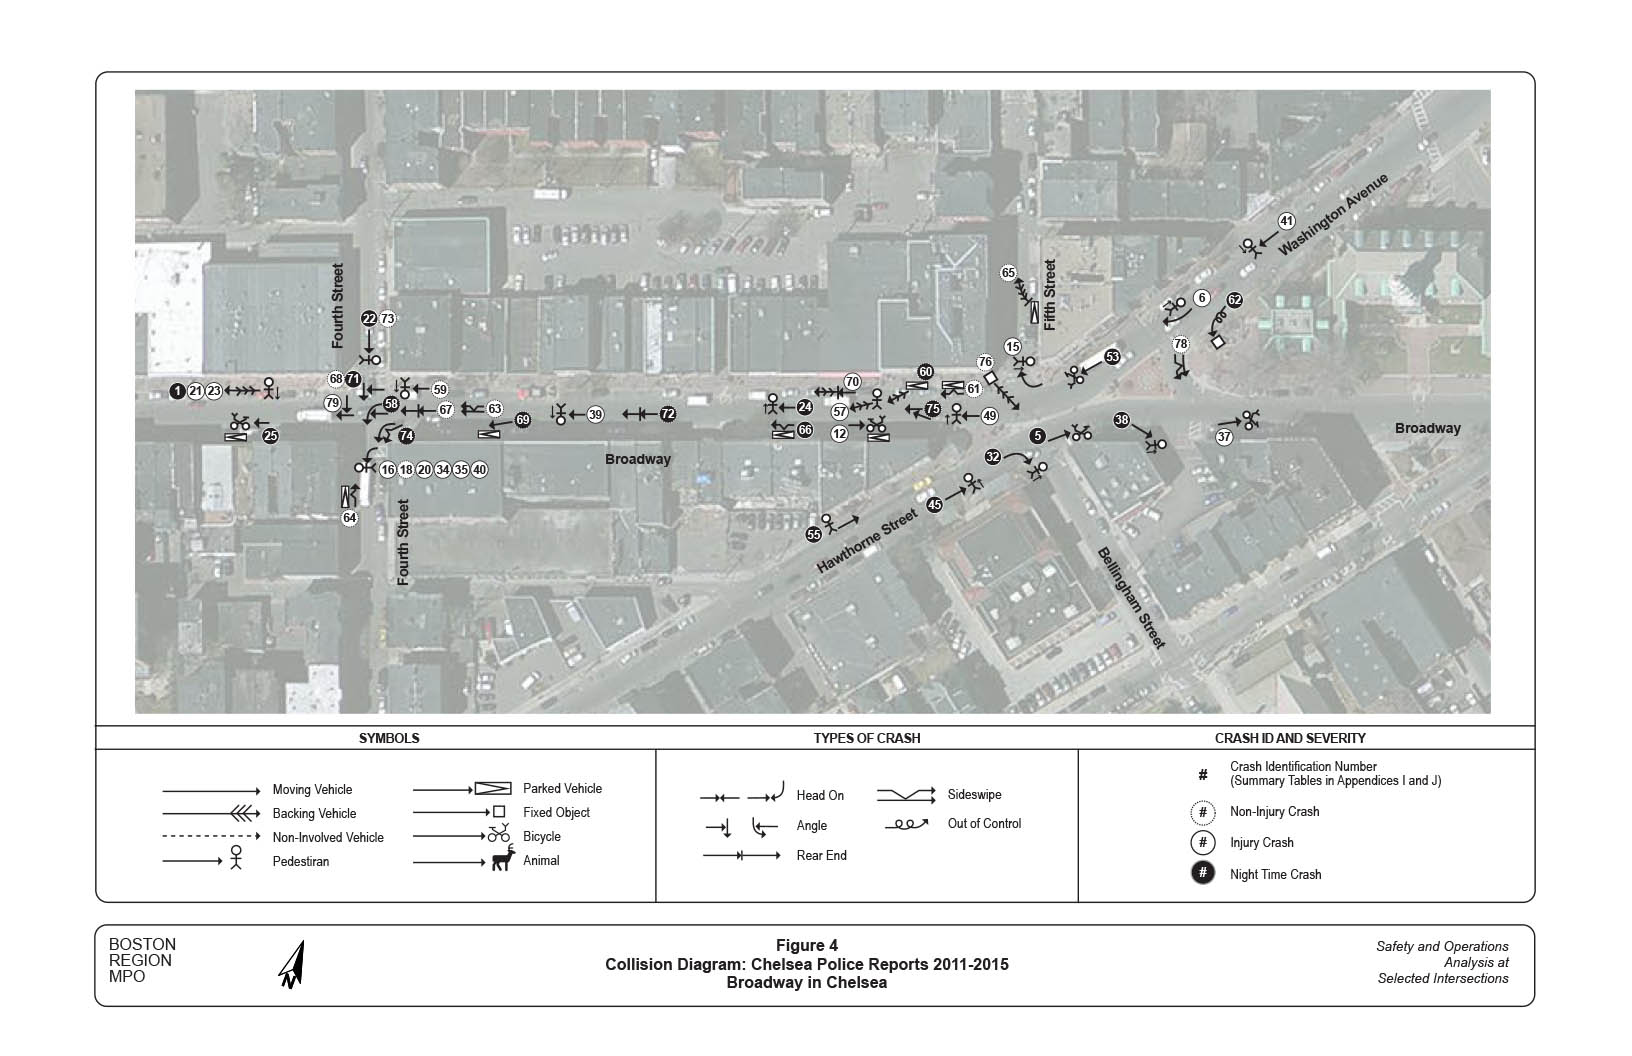 Figure 4 — Collision Diagram: Chelsea Police Reports 2011-2015
Aerial view of study area with computer-drawn superimposed notations that show: the types of crash (head-on, angle, rear-end, sideswipe, out-of-control); and crash severity (non-injury, injury, night-time).
